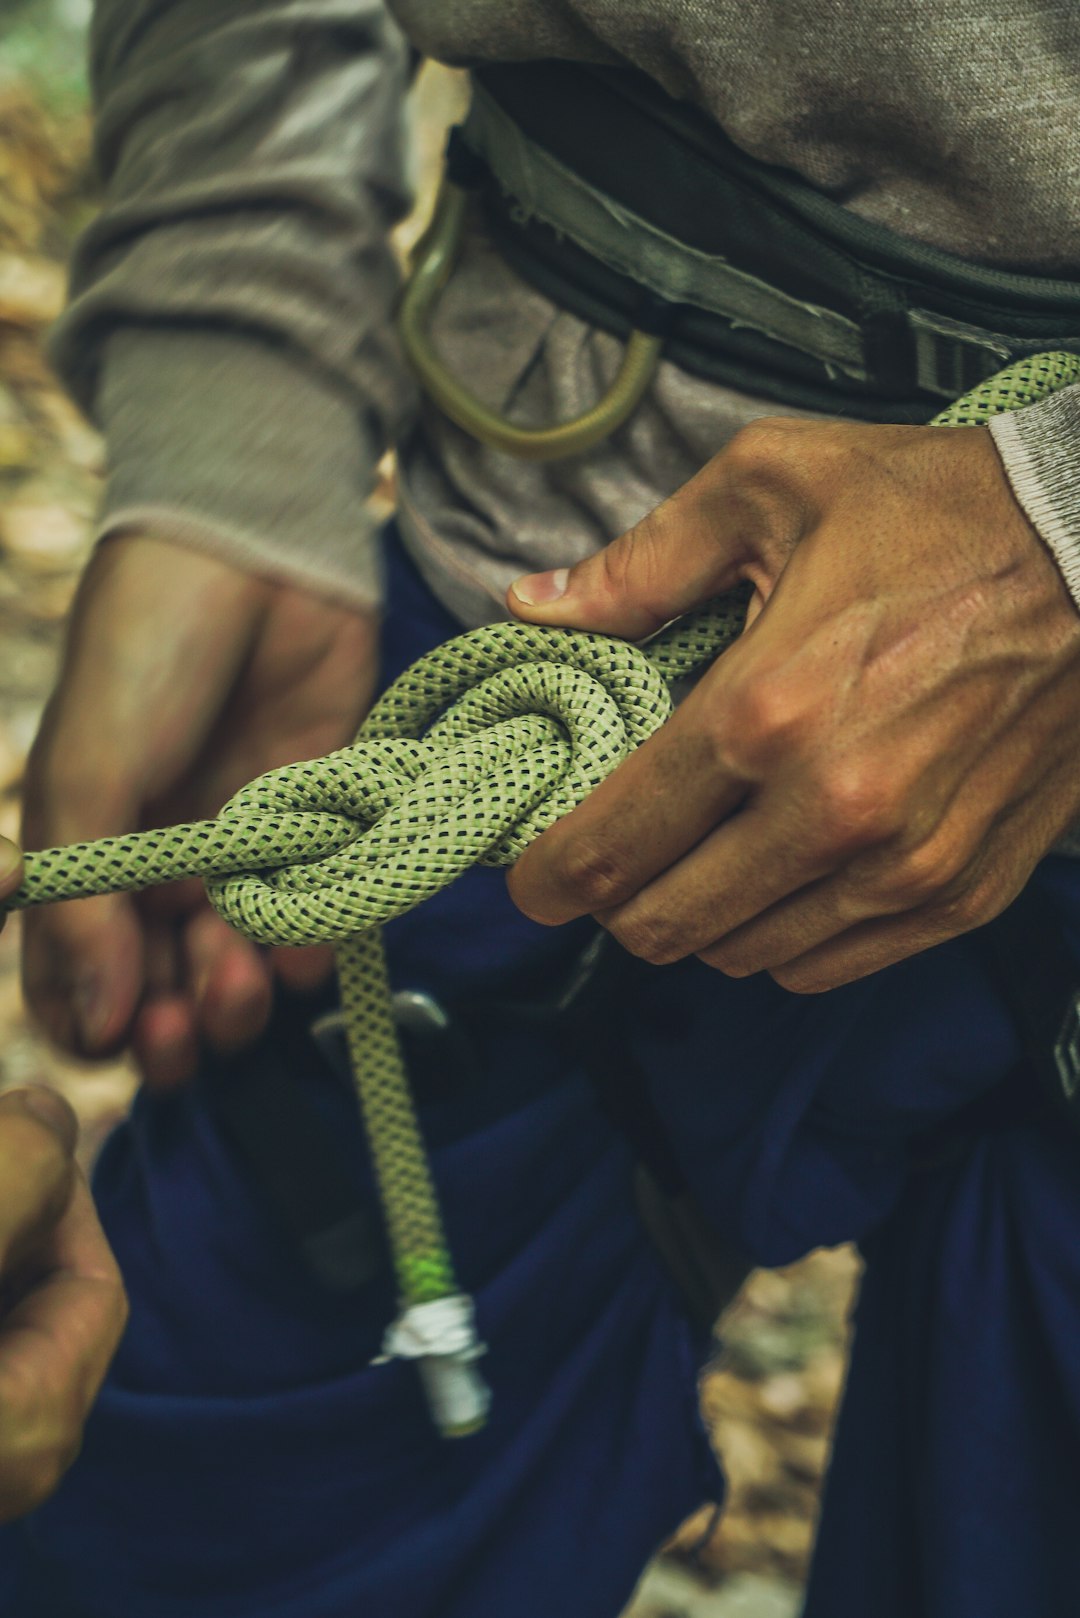 securing with a knot the climbing rope!